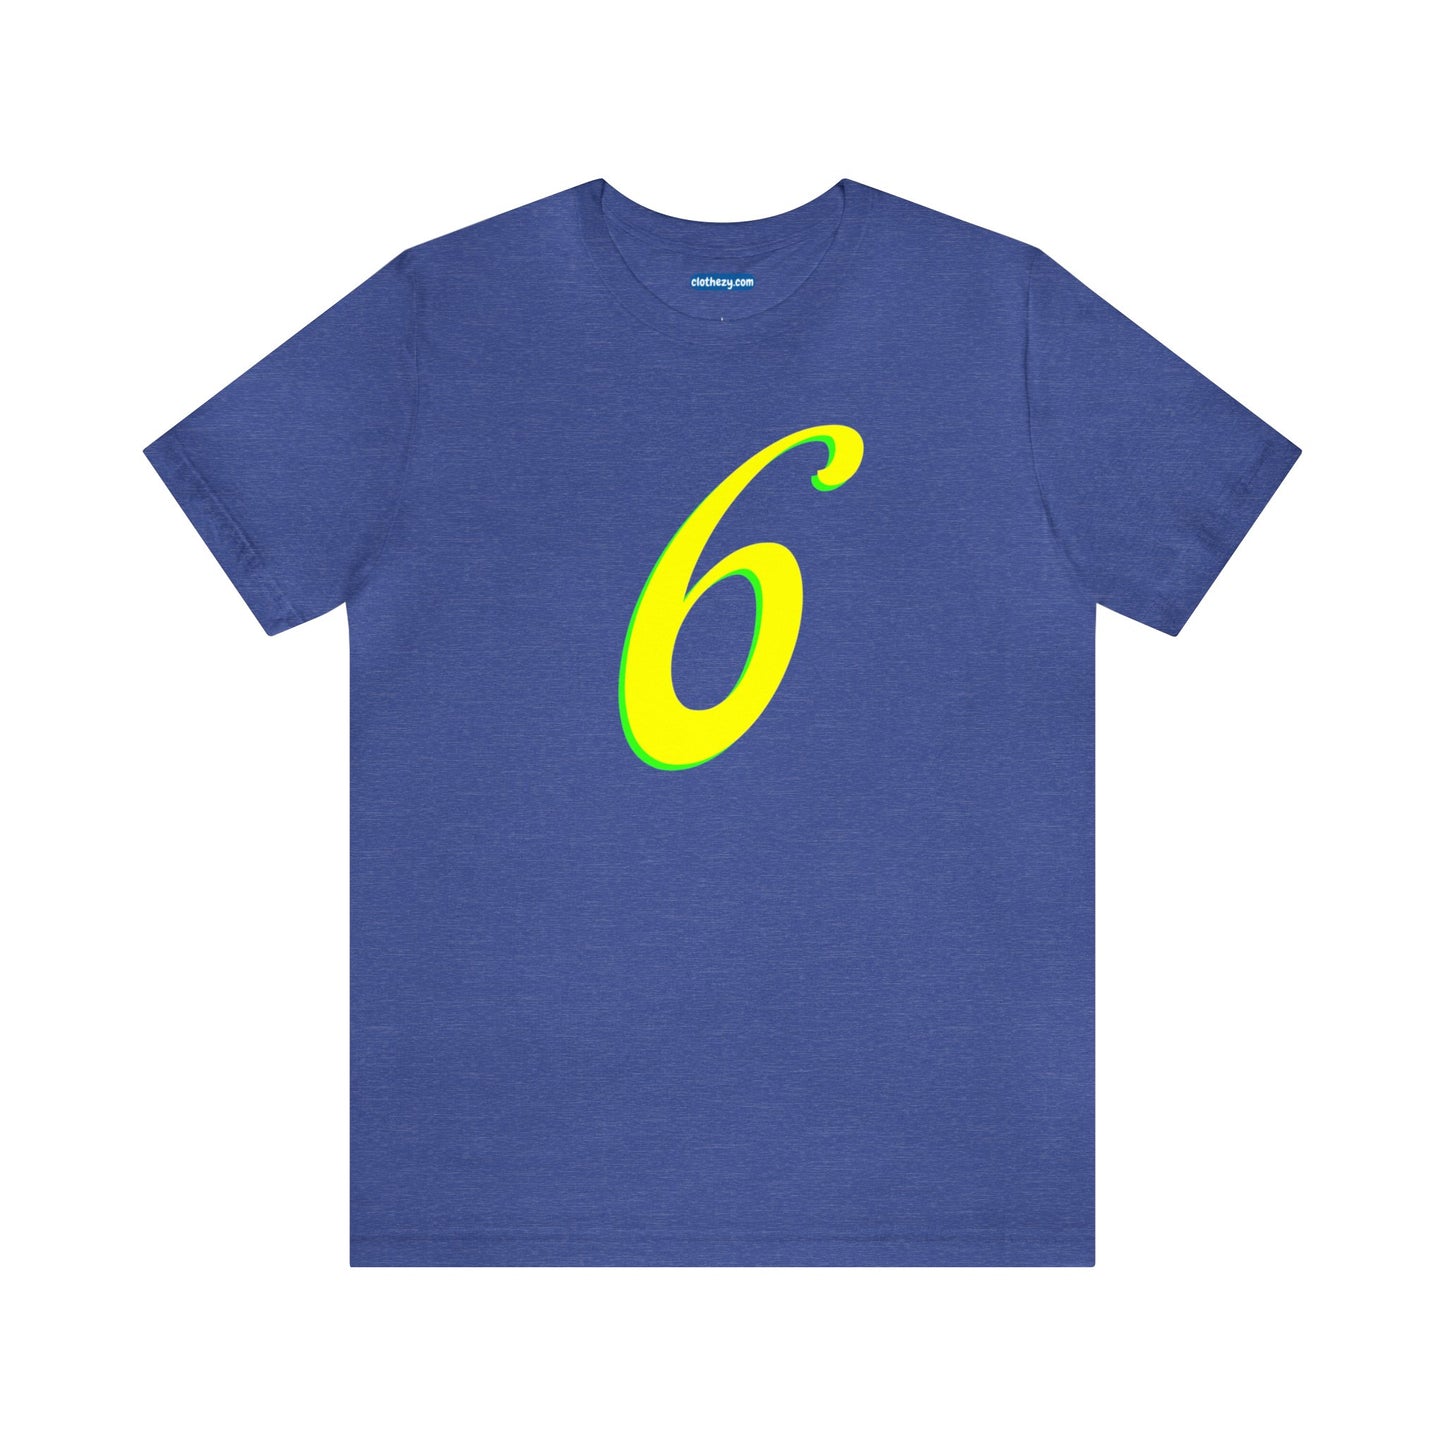 Number 6 Design - Soft Cotton Tee for birthdays and celebrations, Gift for friends and family, Multiple Options by clothezy.com in Navy Size Small - Buy Now